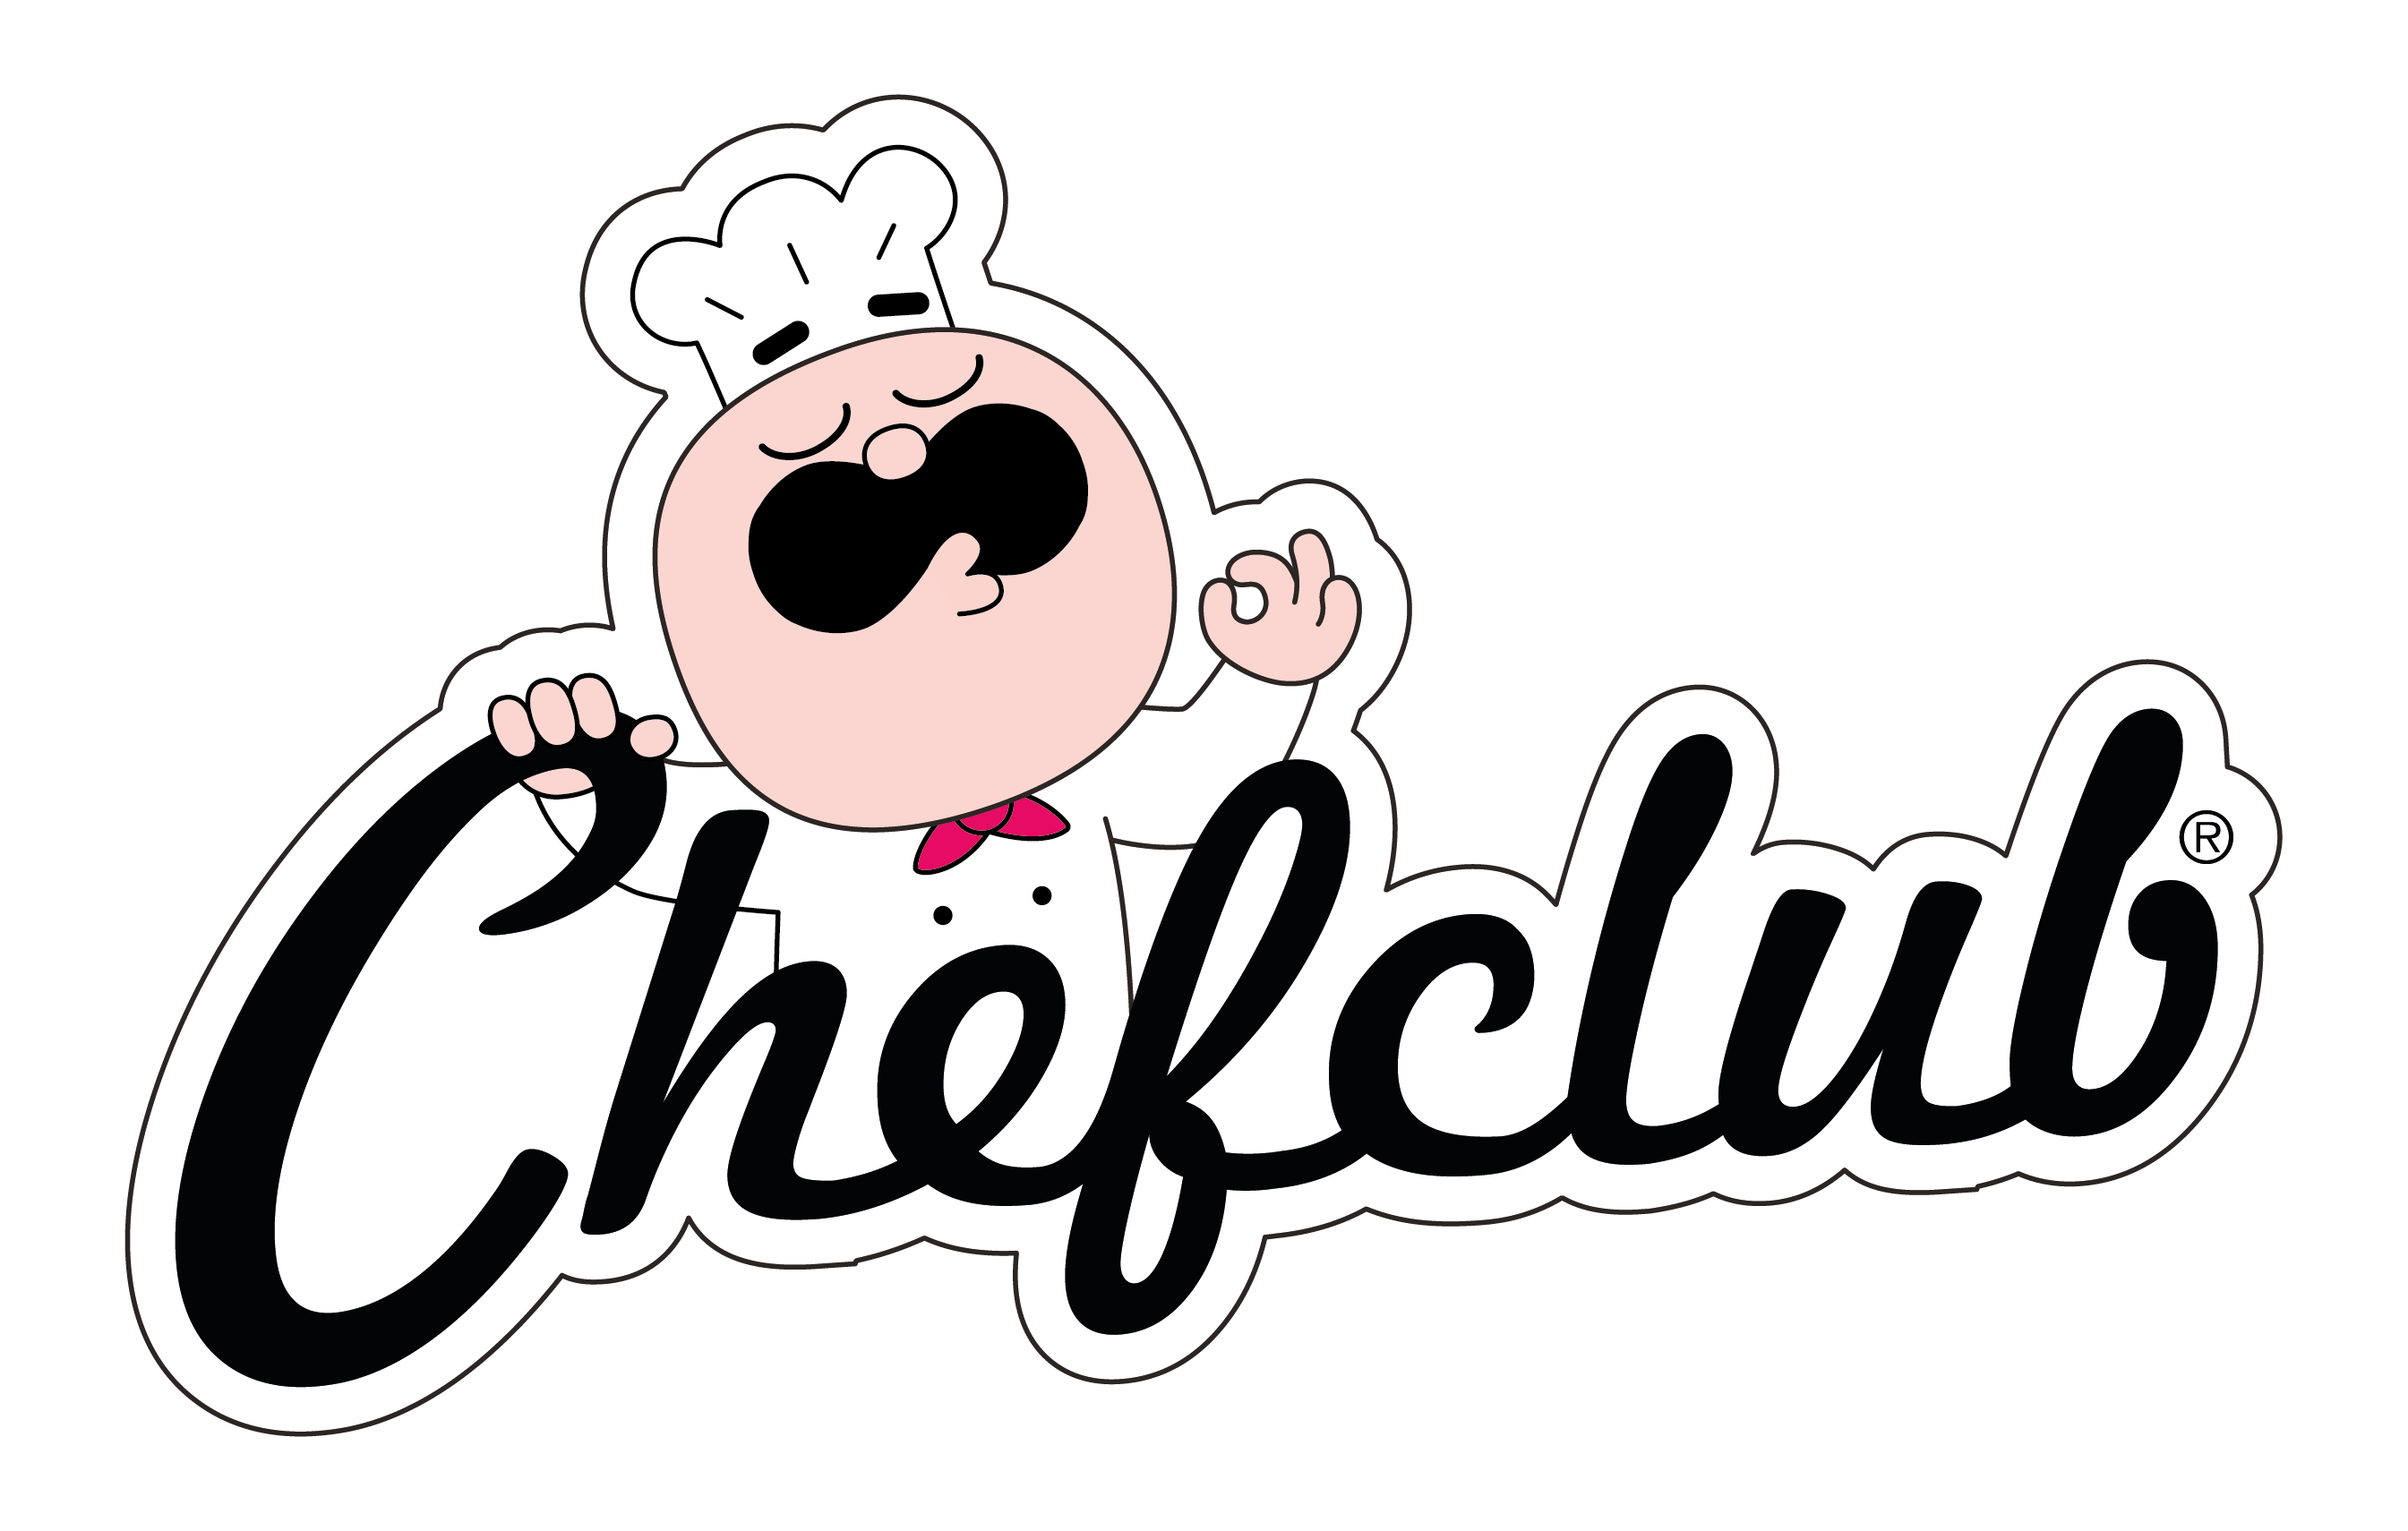 Chefclub - Licensing Matters